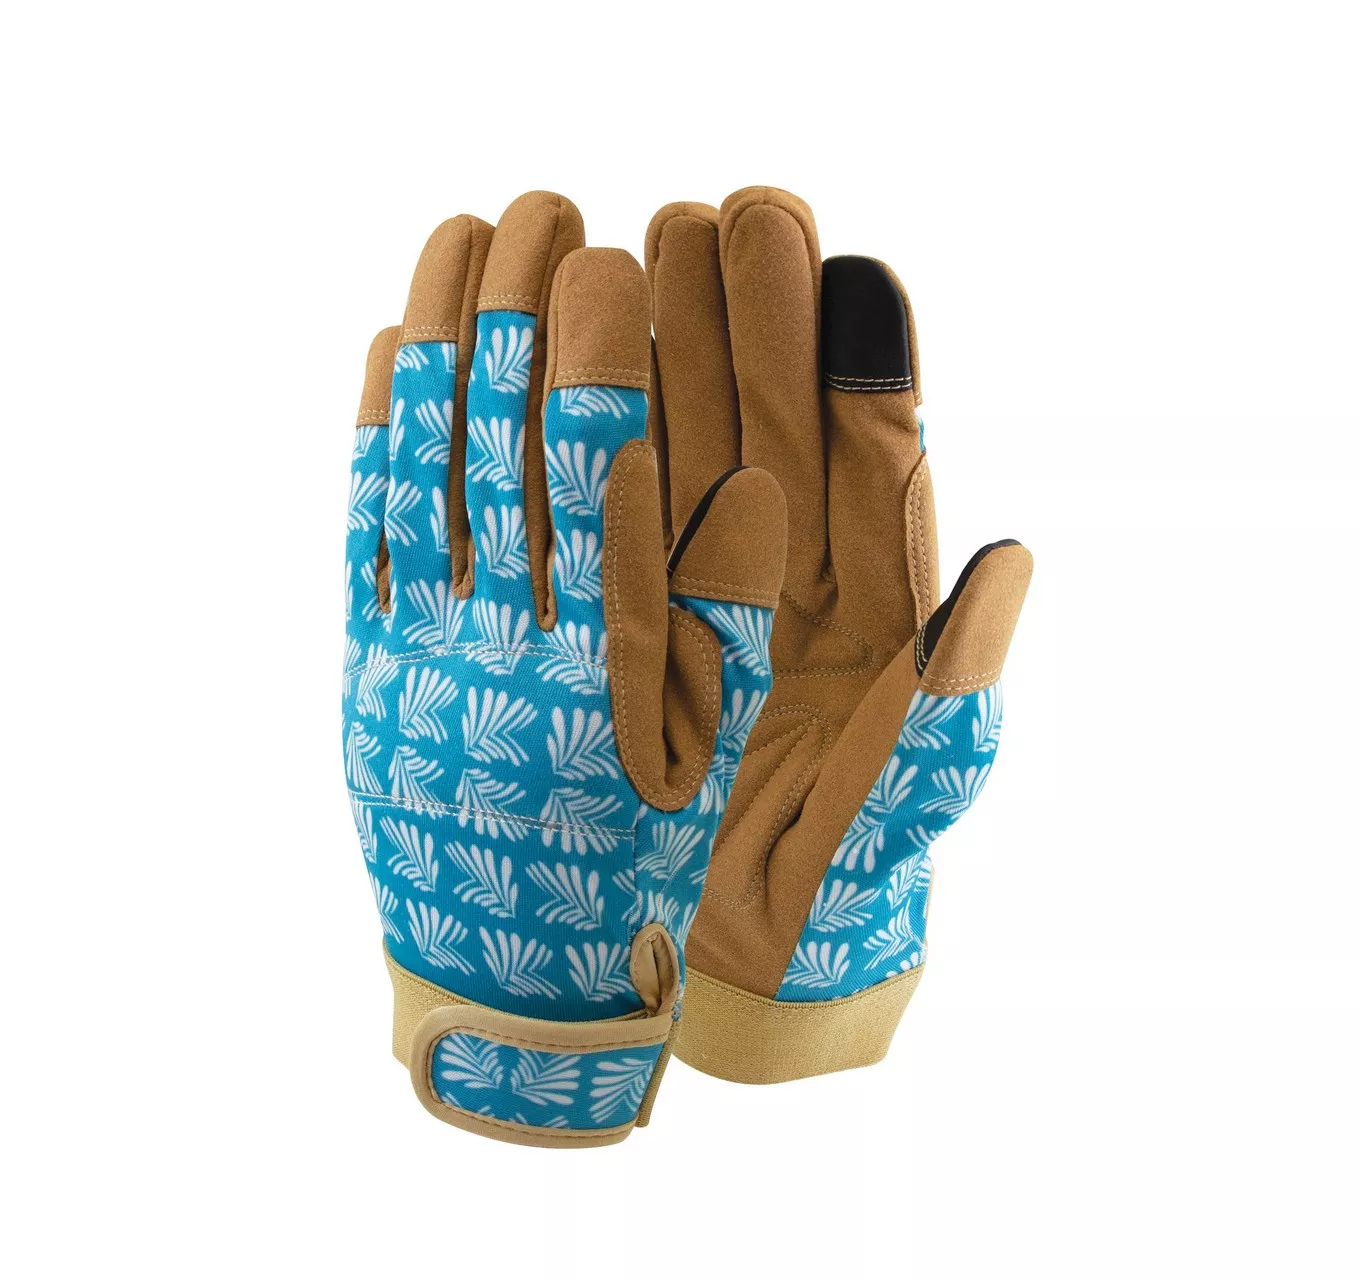 TGL126 Synthetic Leather Gloves BL M